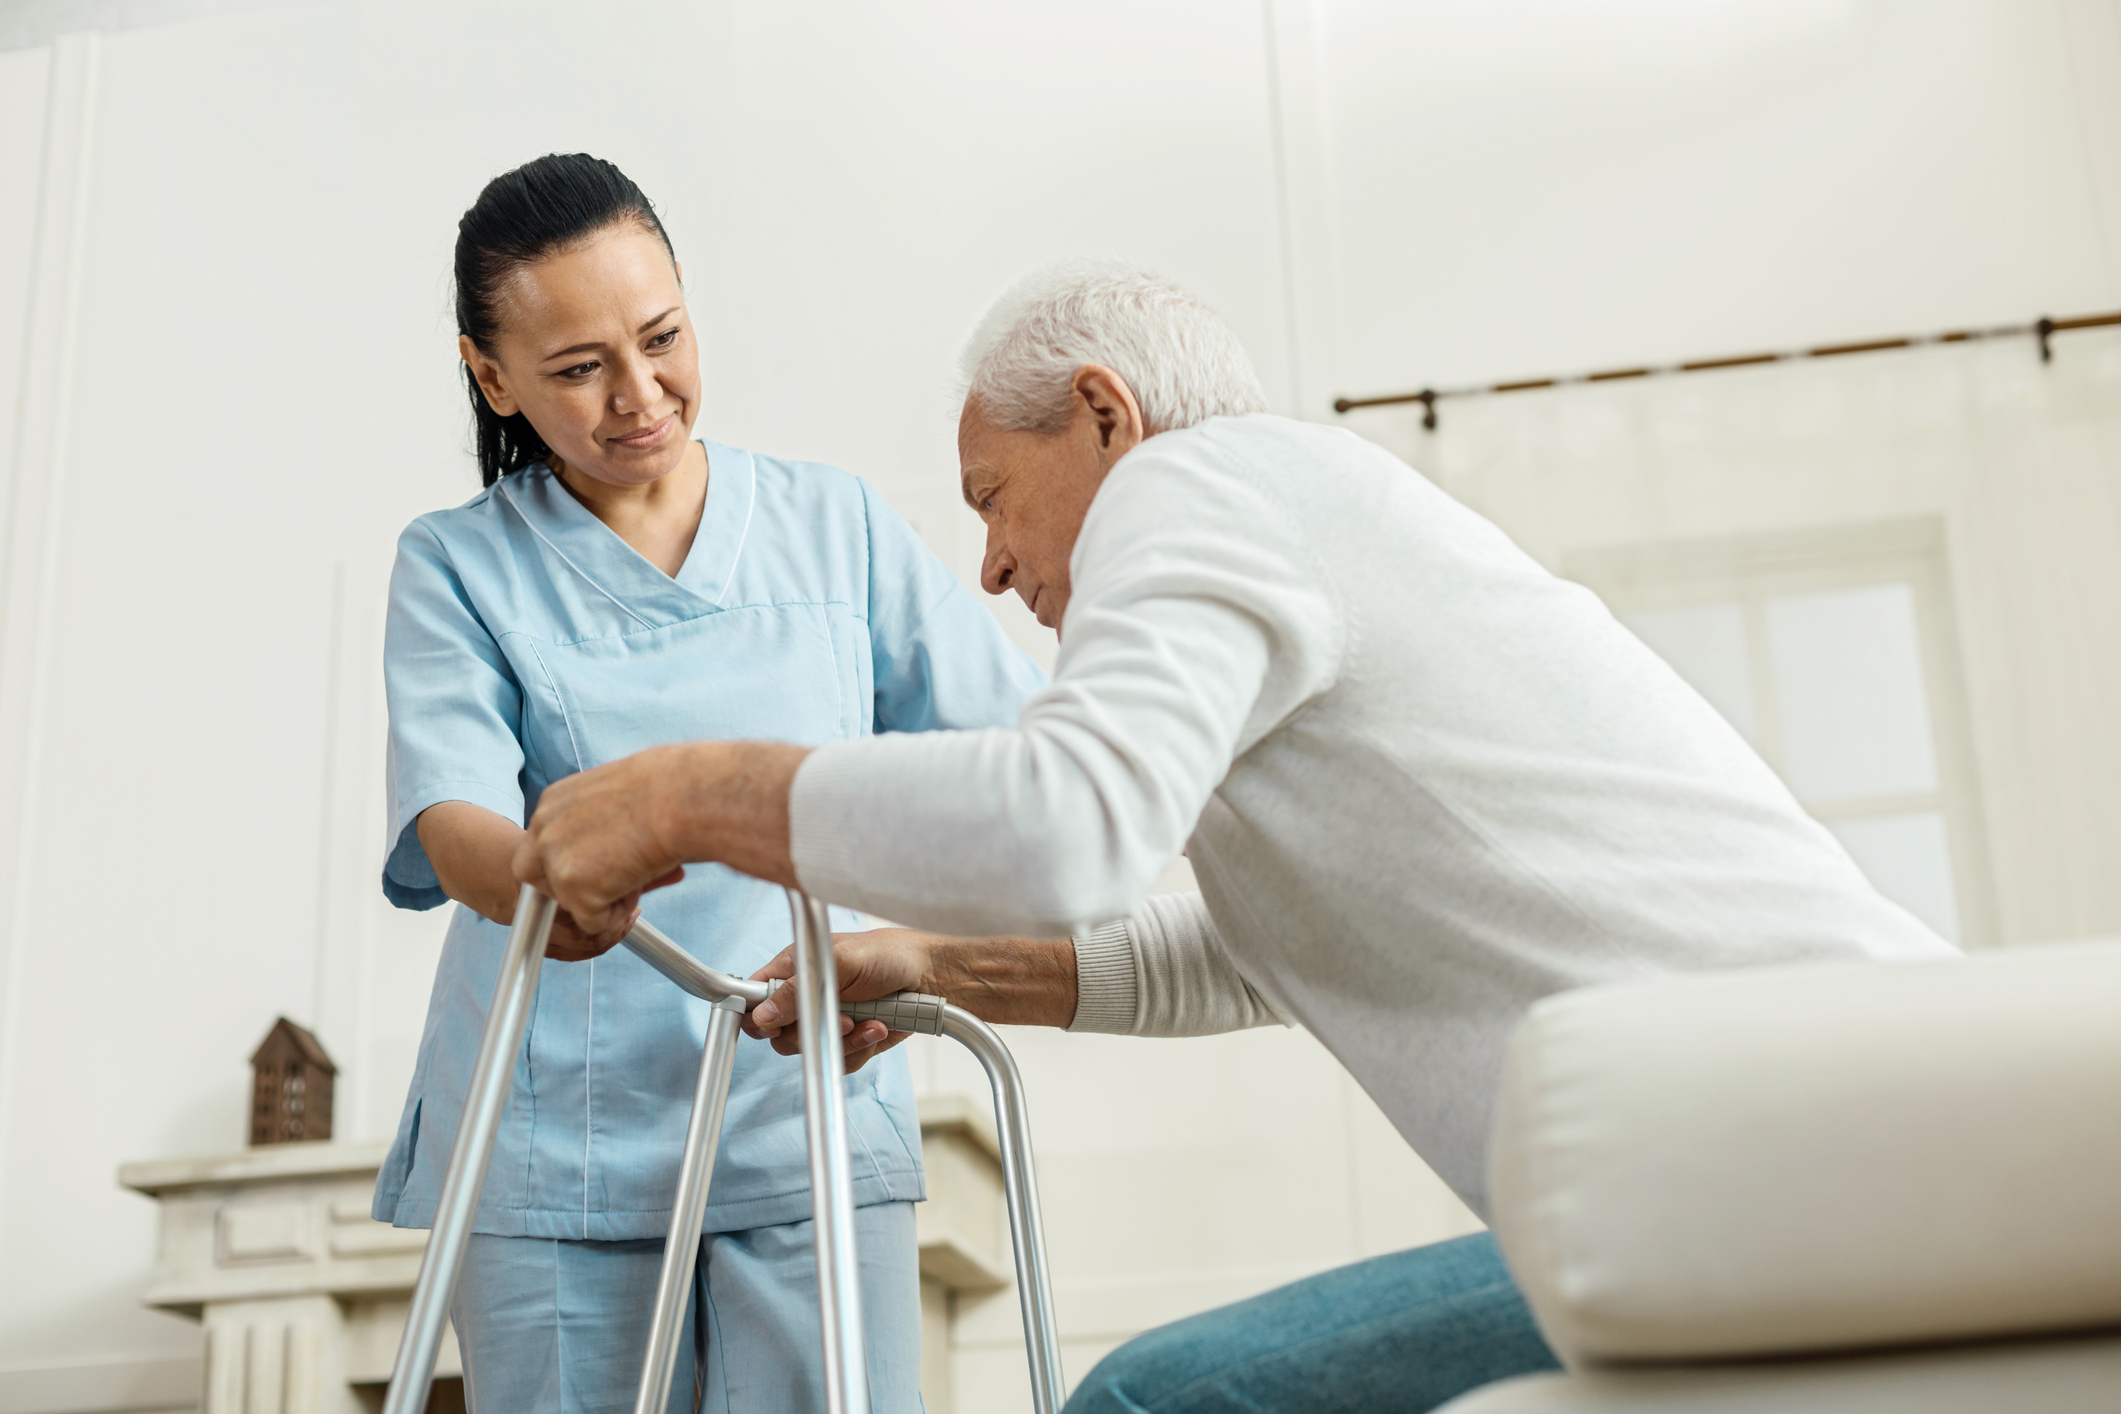 Quebec Needs a Strong Network of Home Care Services